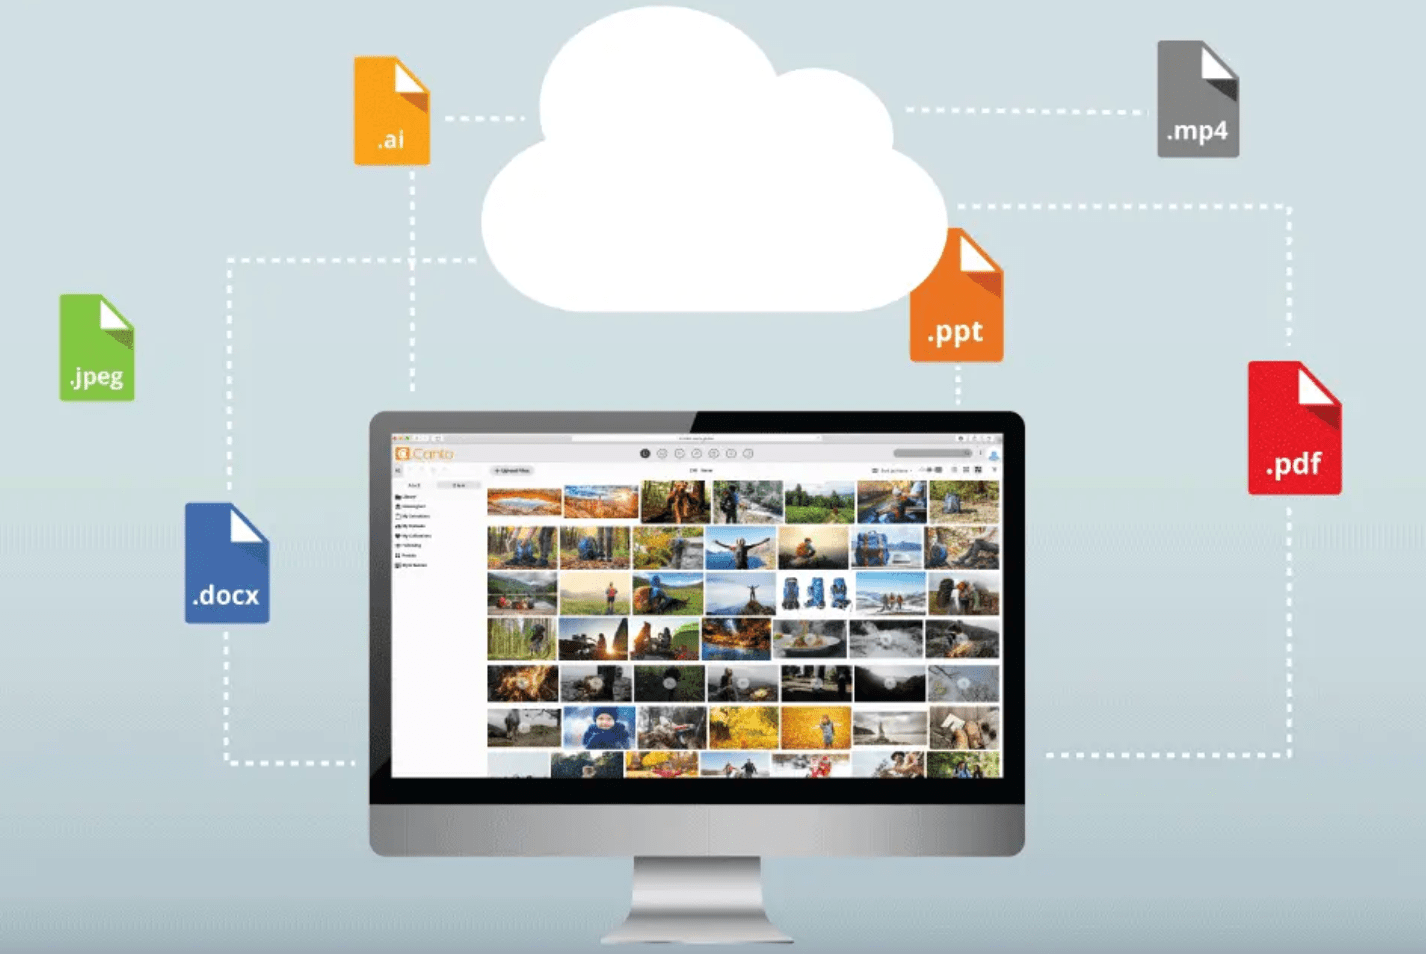 Canto image of laptop and different file types organized into folders via cloud example.